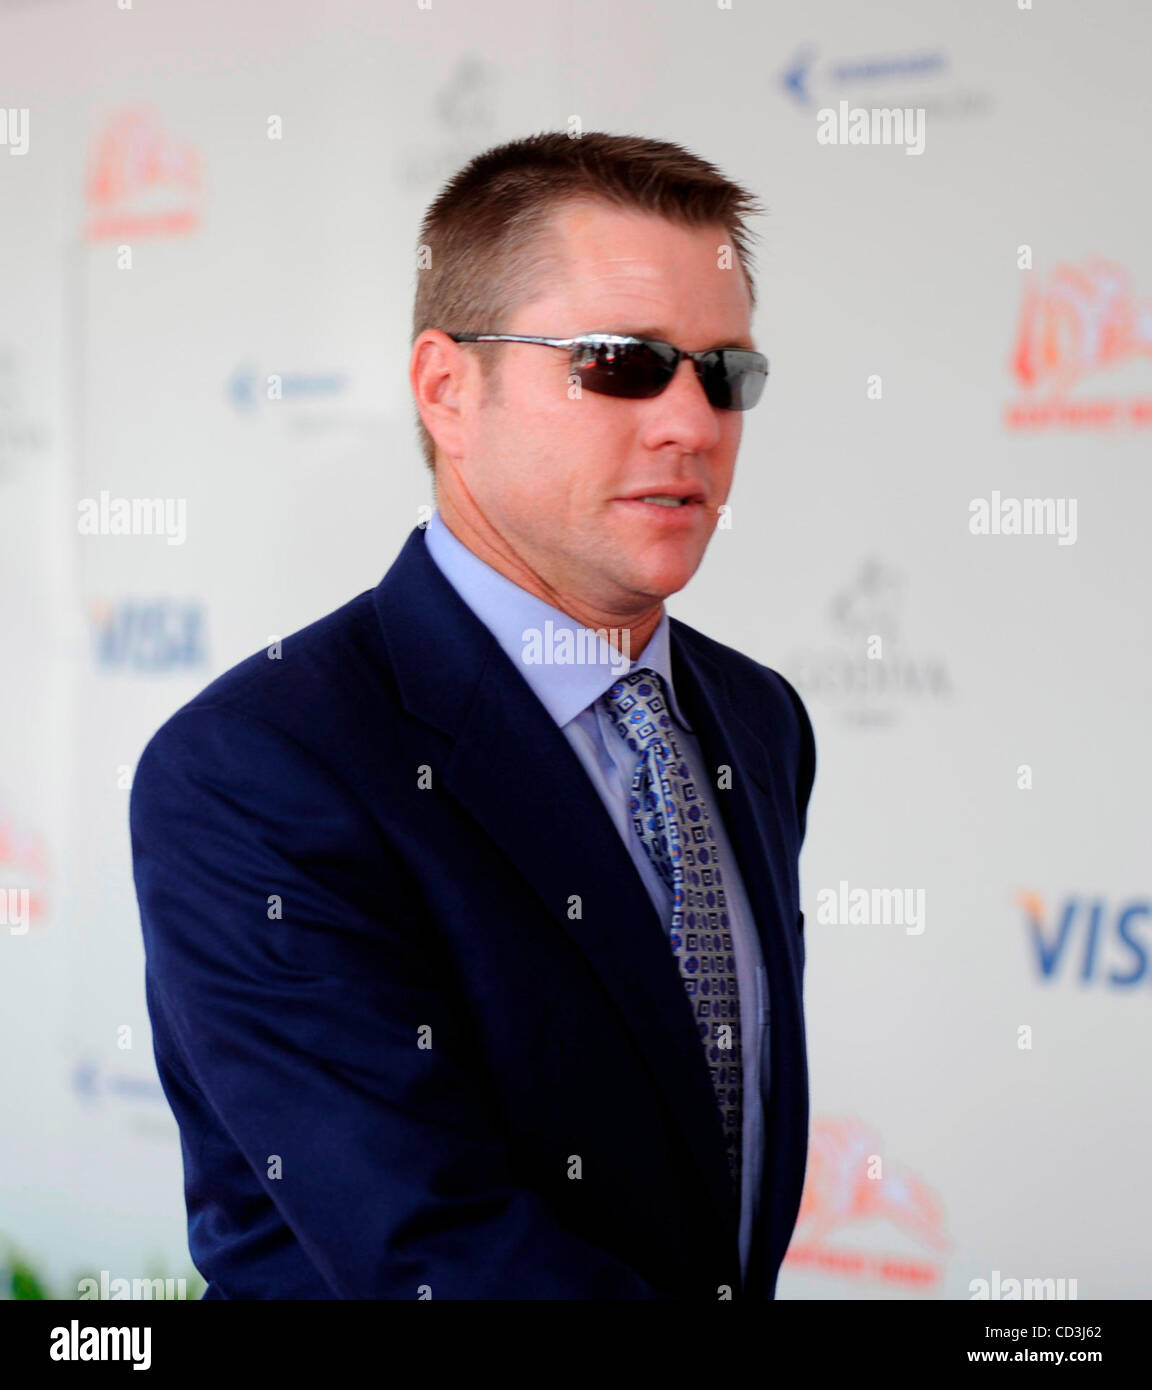 Professional golfer Scott Verplank arrives at the 134th running of the Kentucky Derby Saturday May 3, 2008, at Churchill Downs, Louisville, Ky. Photo by Angela Baldridge Stock Photo